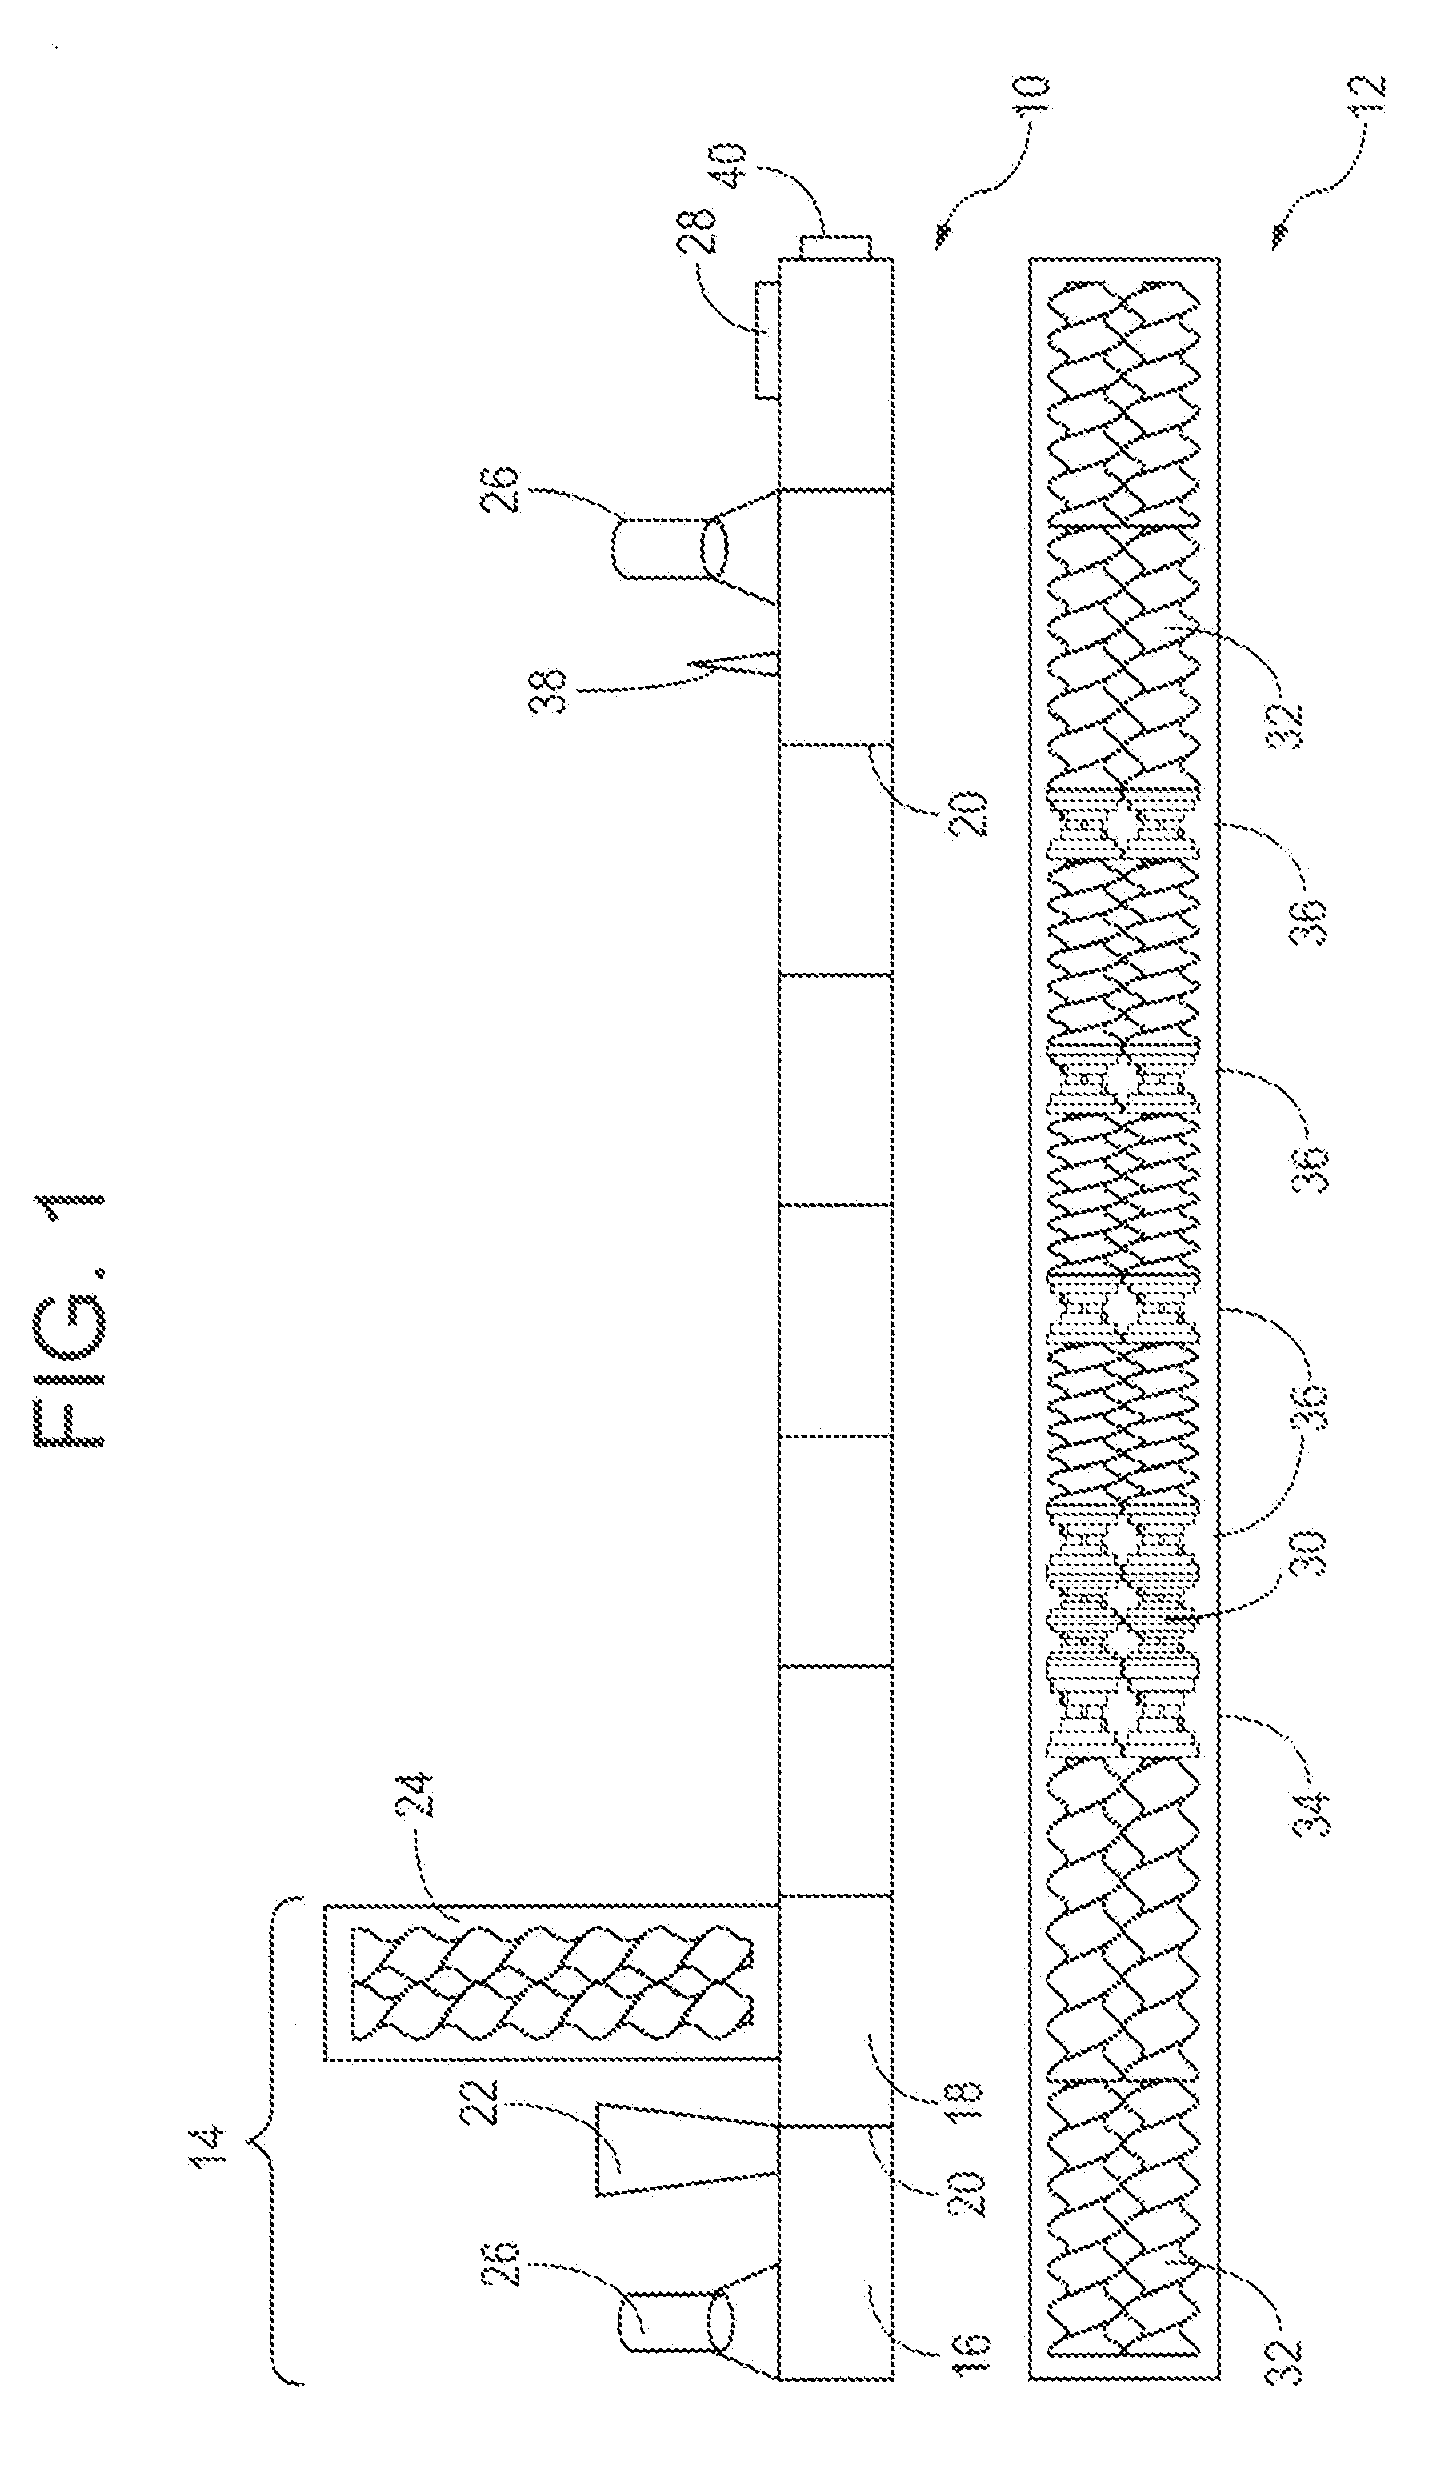 Biaxially Oriented Nanocomposite Film, Method of Manufacture, and Articles Thereof